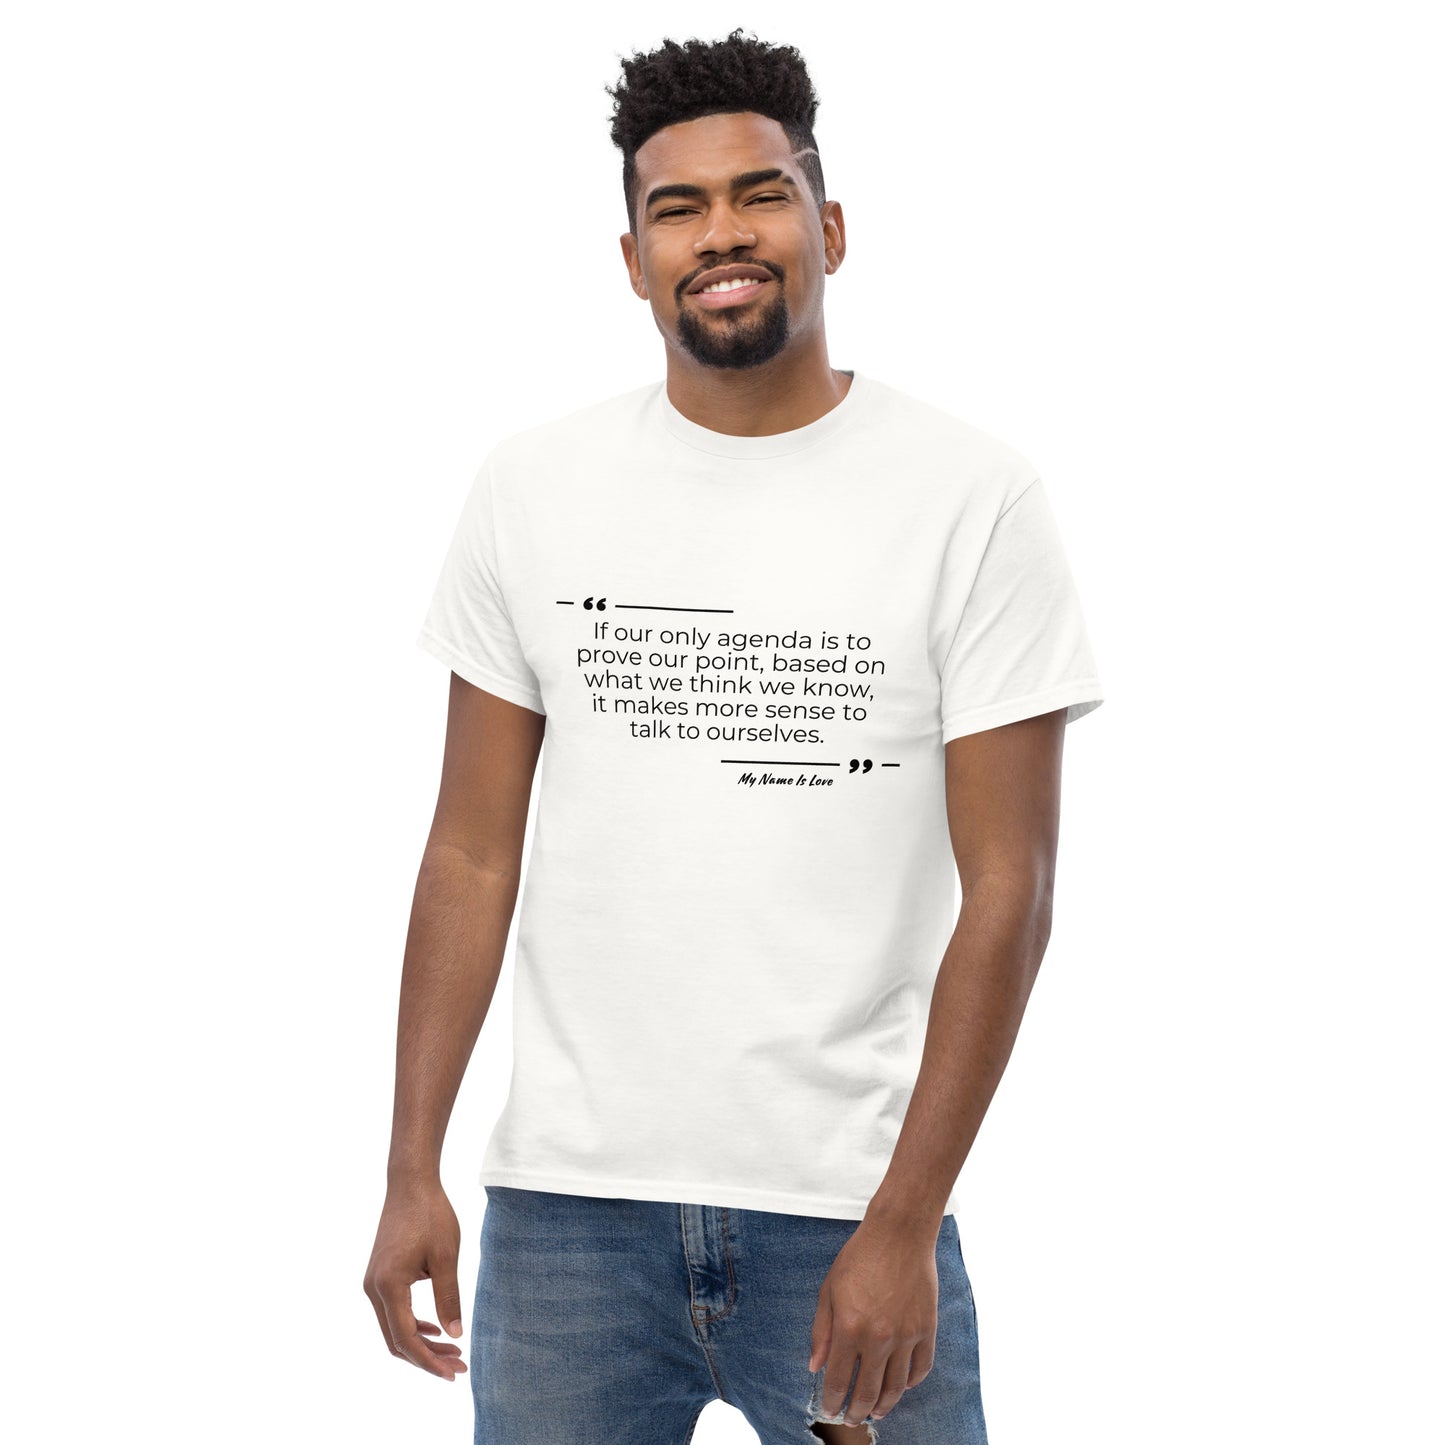 Dissolving differences quote: Men's classic tee